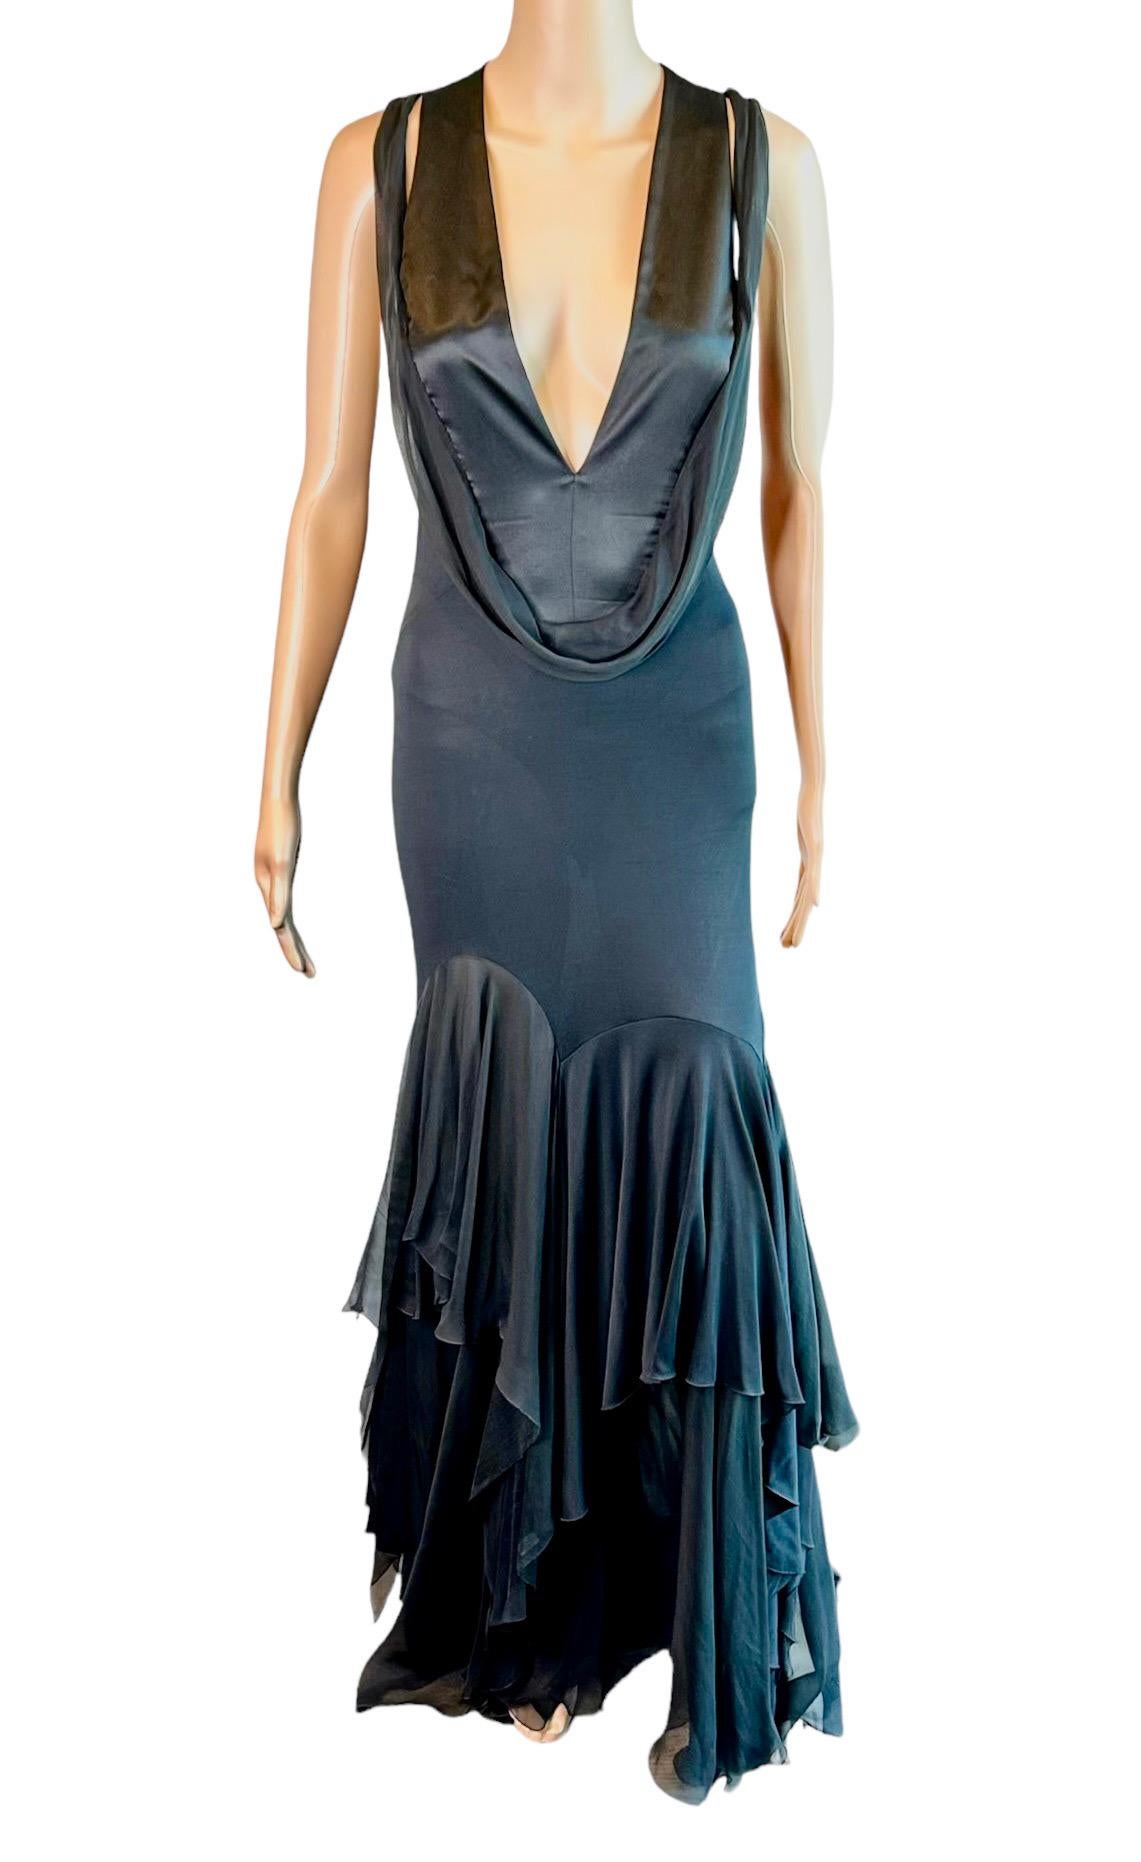 Versace S/S 2004 Plunged Halter Open Back Ruffles Black Evening Dress Gown  For Sale 2